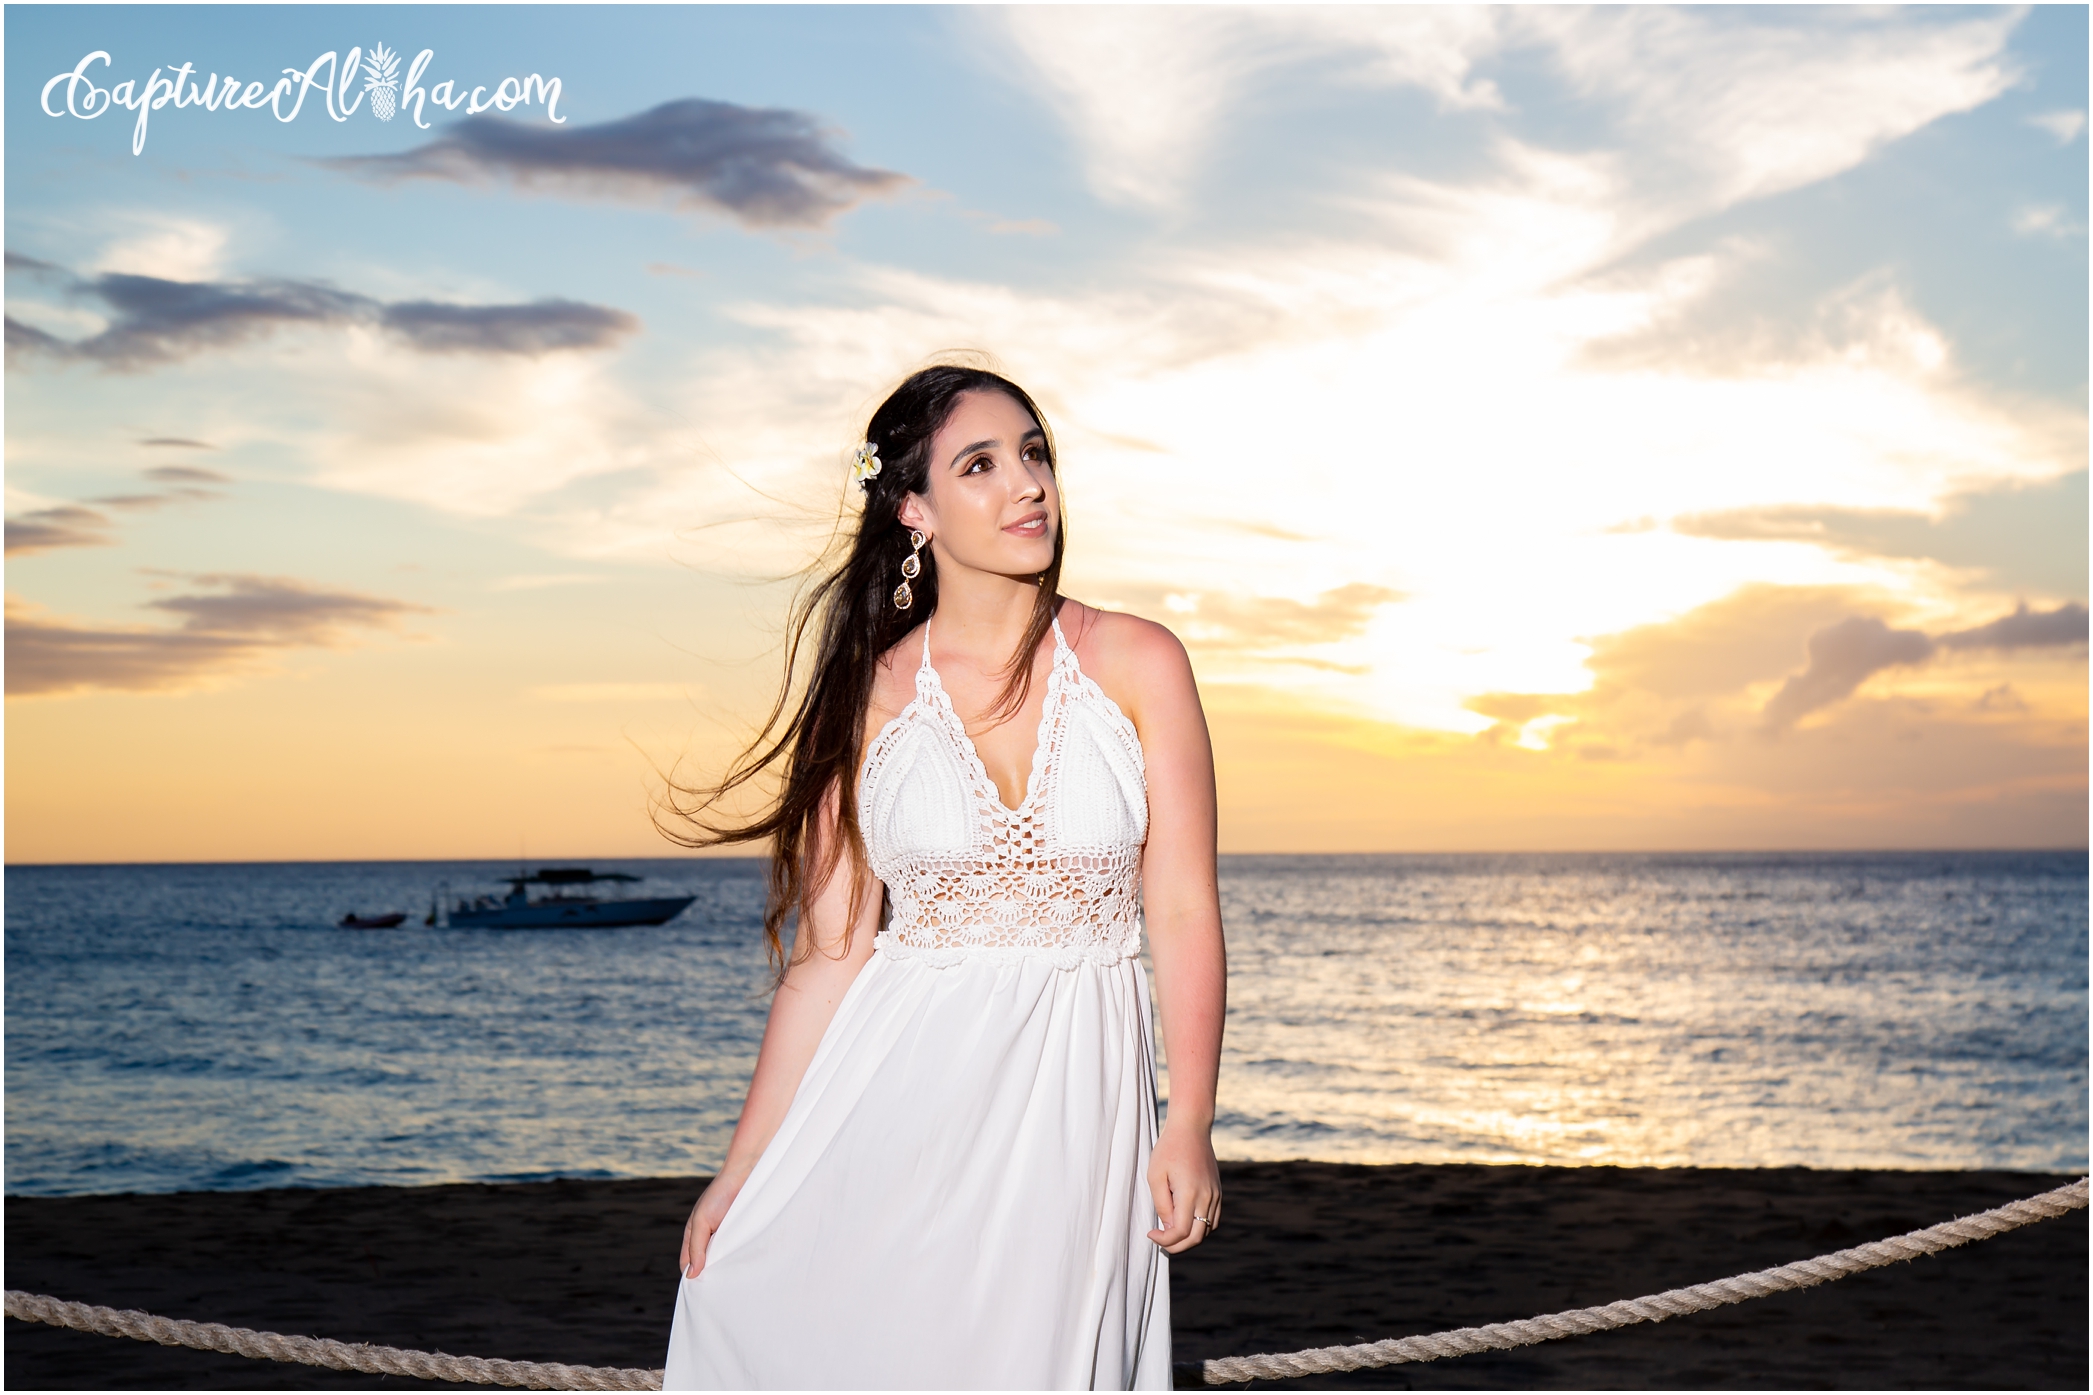 Maui Senior Portrait Photography at Sunset in Kaanapali